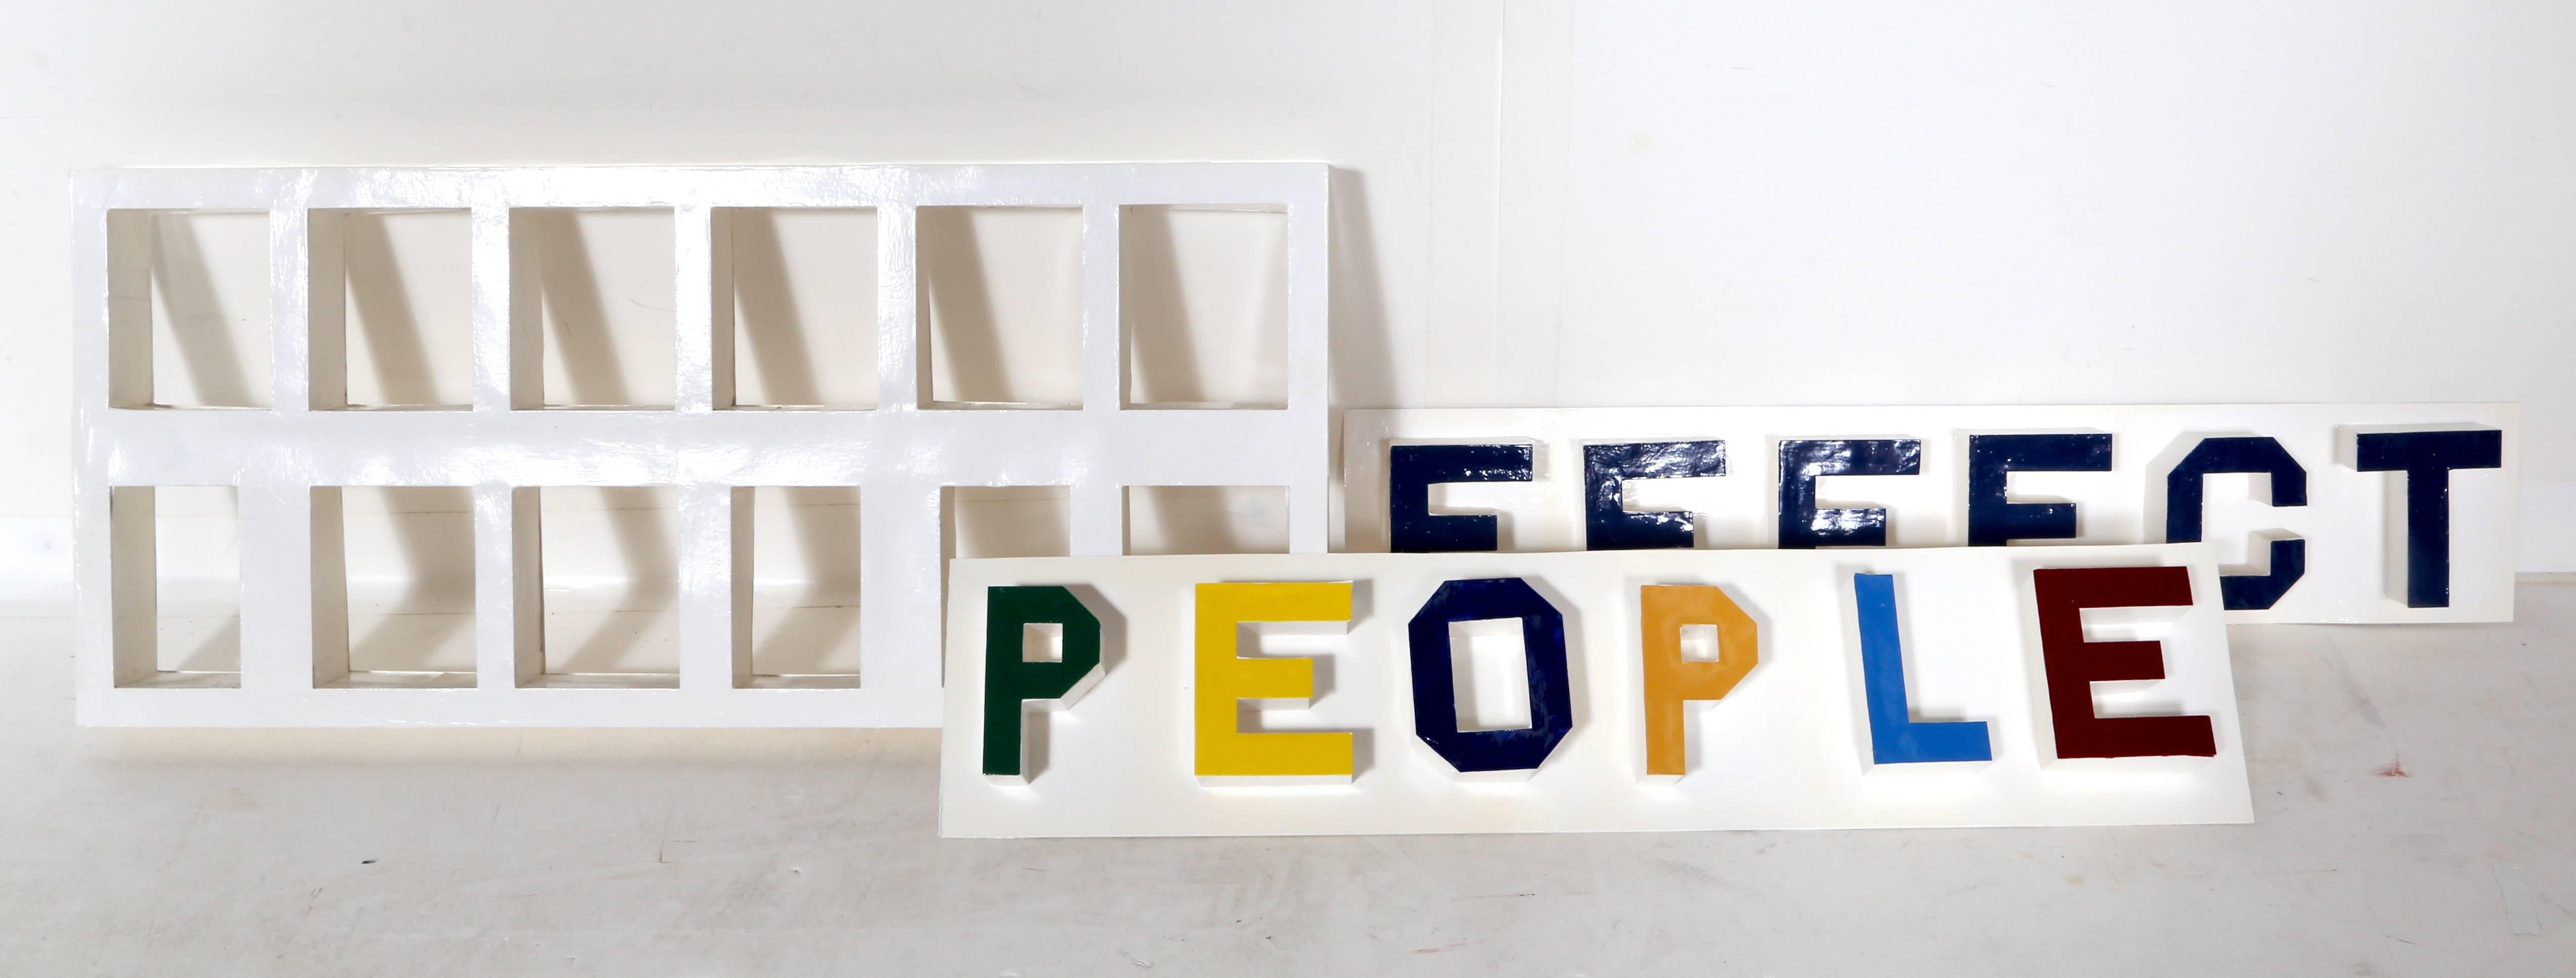 Effect People - Affect People, Text Art Mixed Media Sculpture by Chris Caccamise For Sale 1